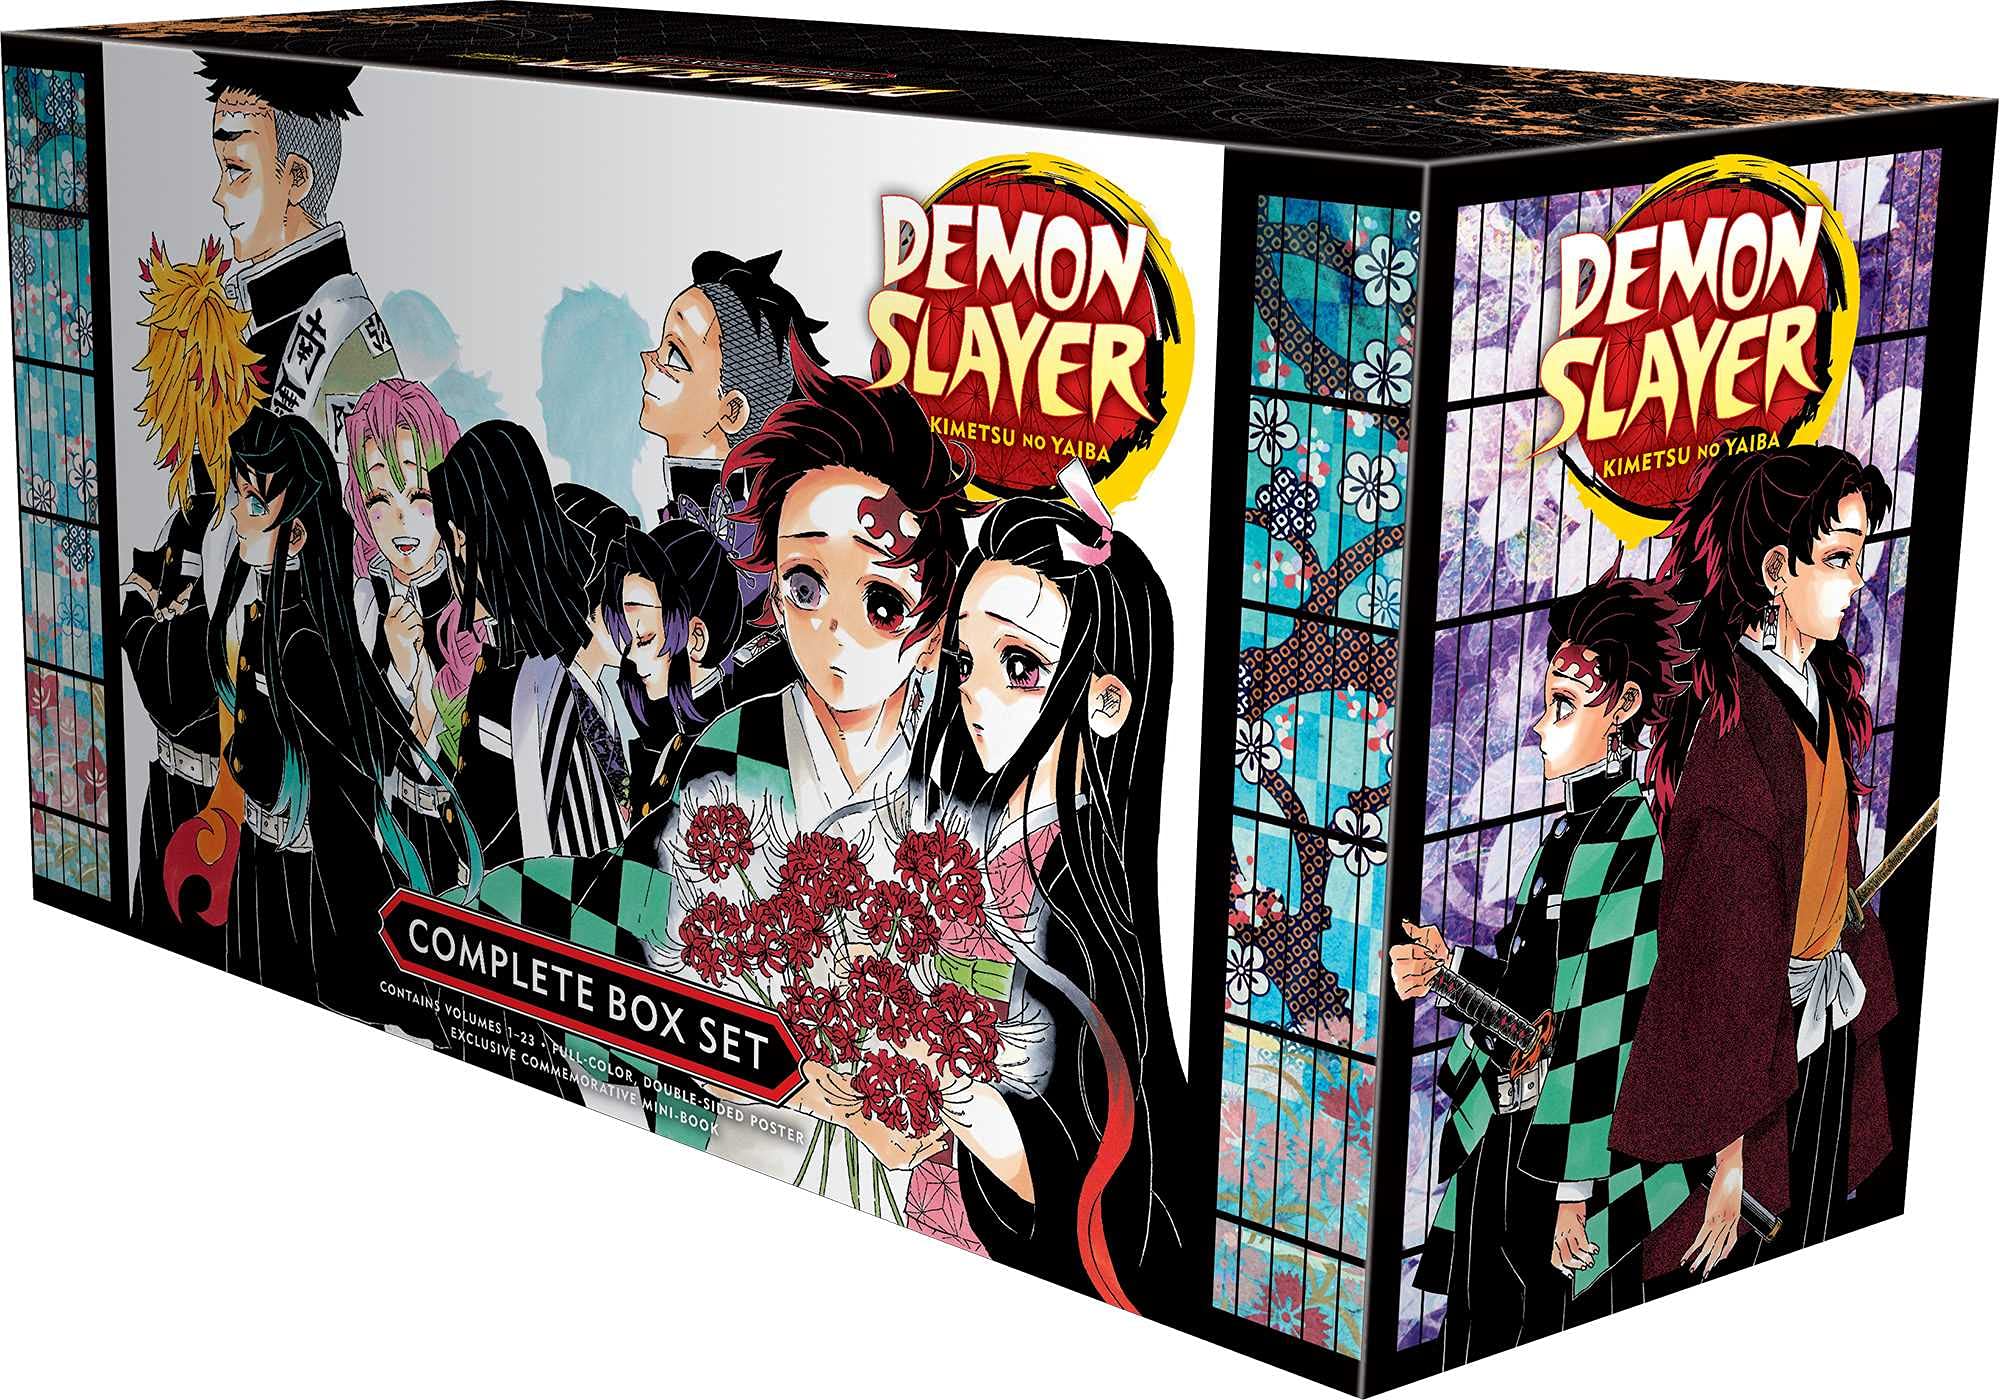 DEMONSLAYER COMPLETE BOX SET : Includes #1-23 with premium - Paperback